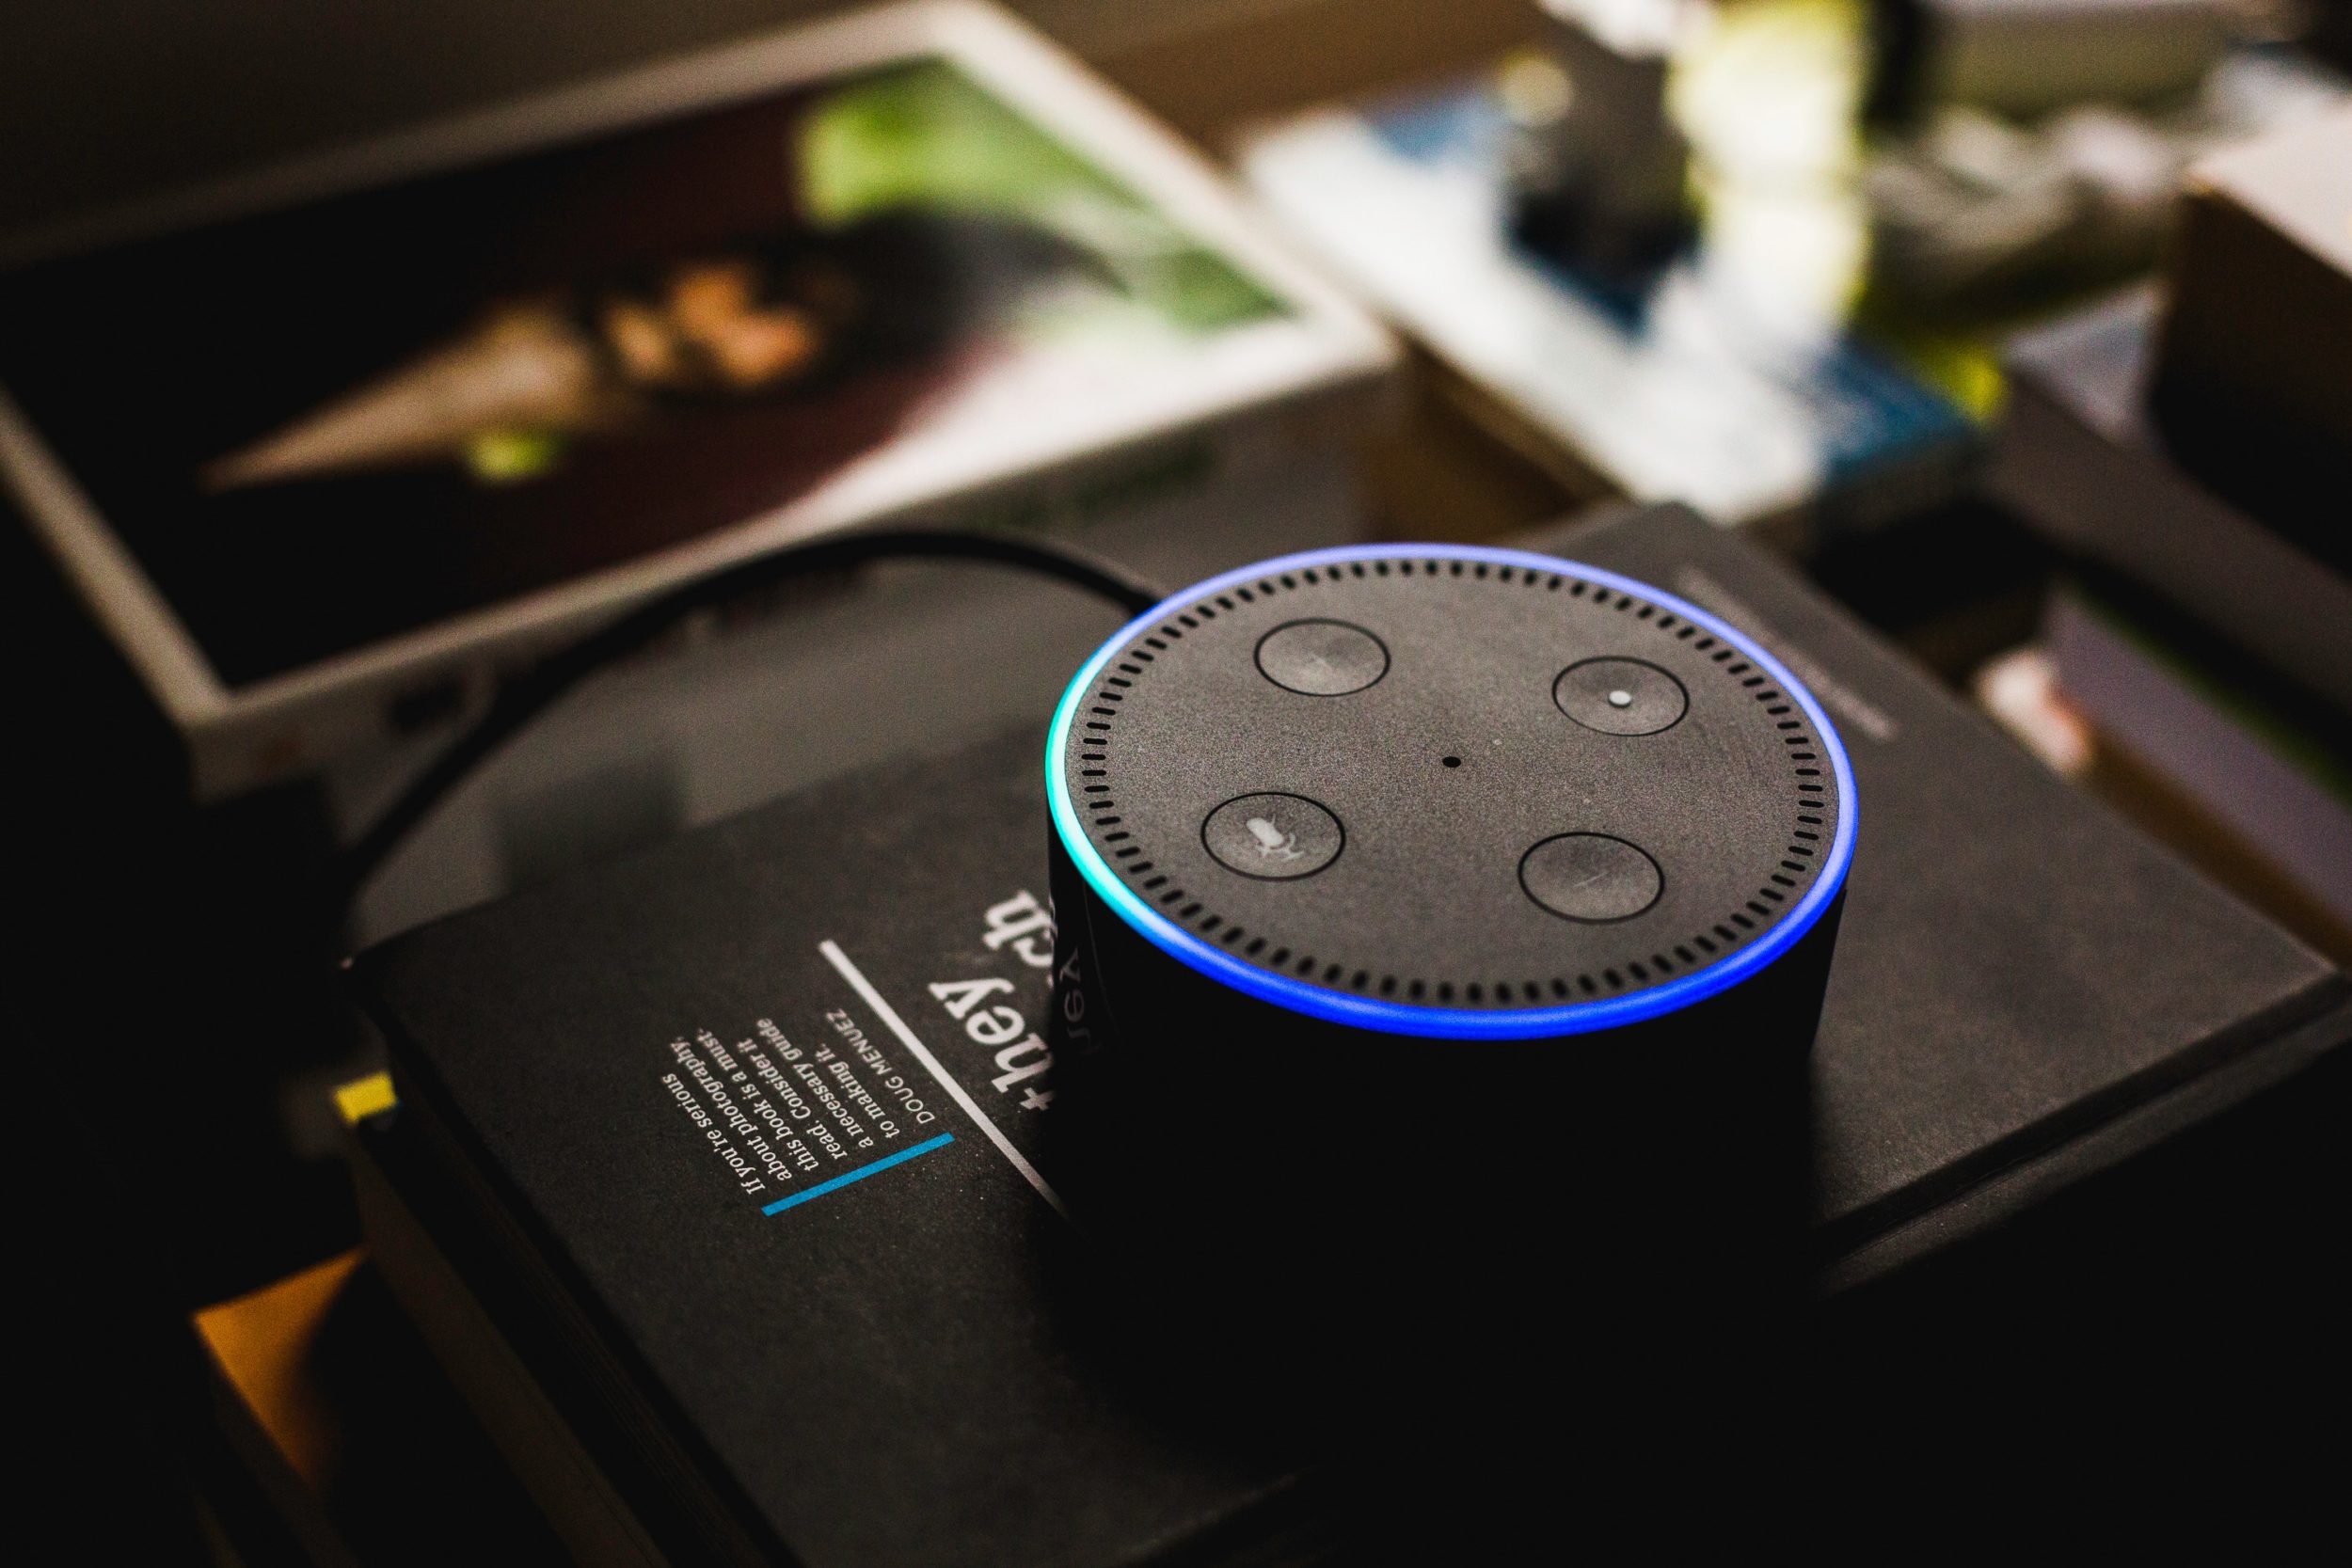 Amazon Dot with Alexa voice assistance sitting on top of books